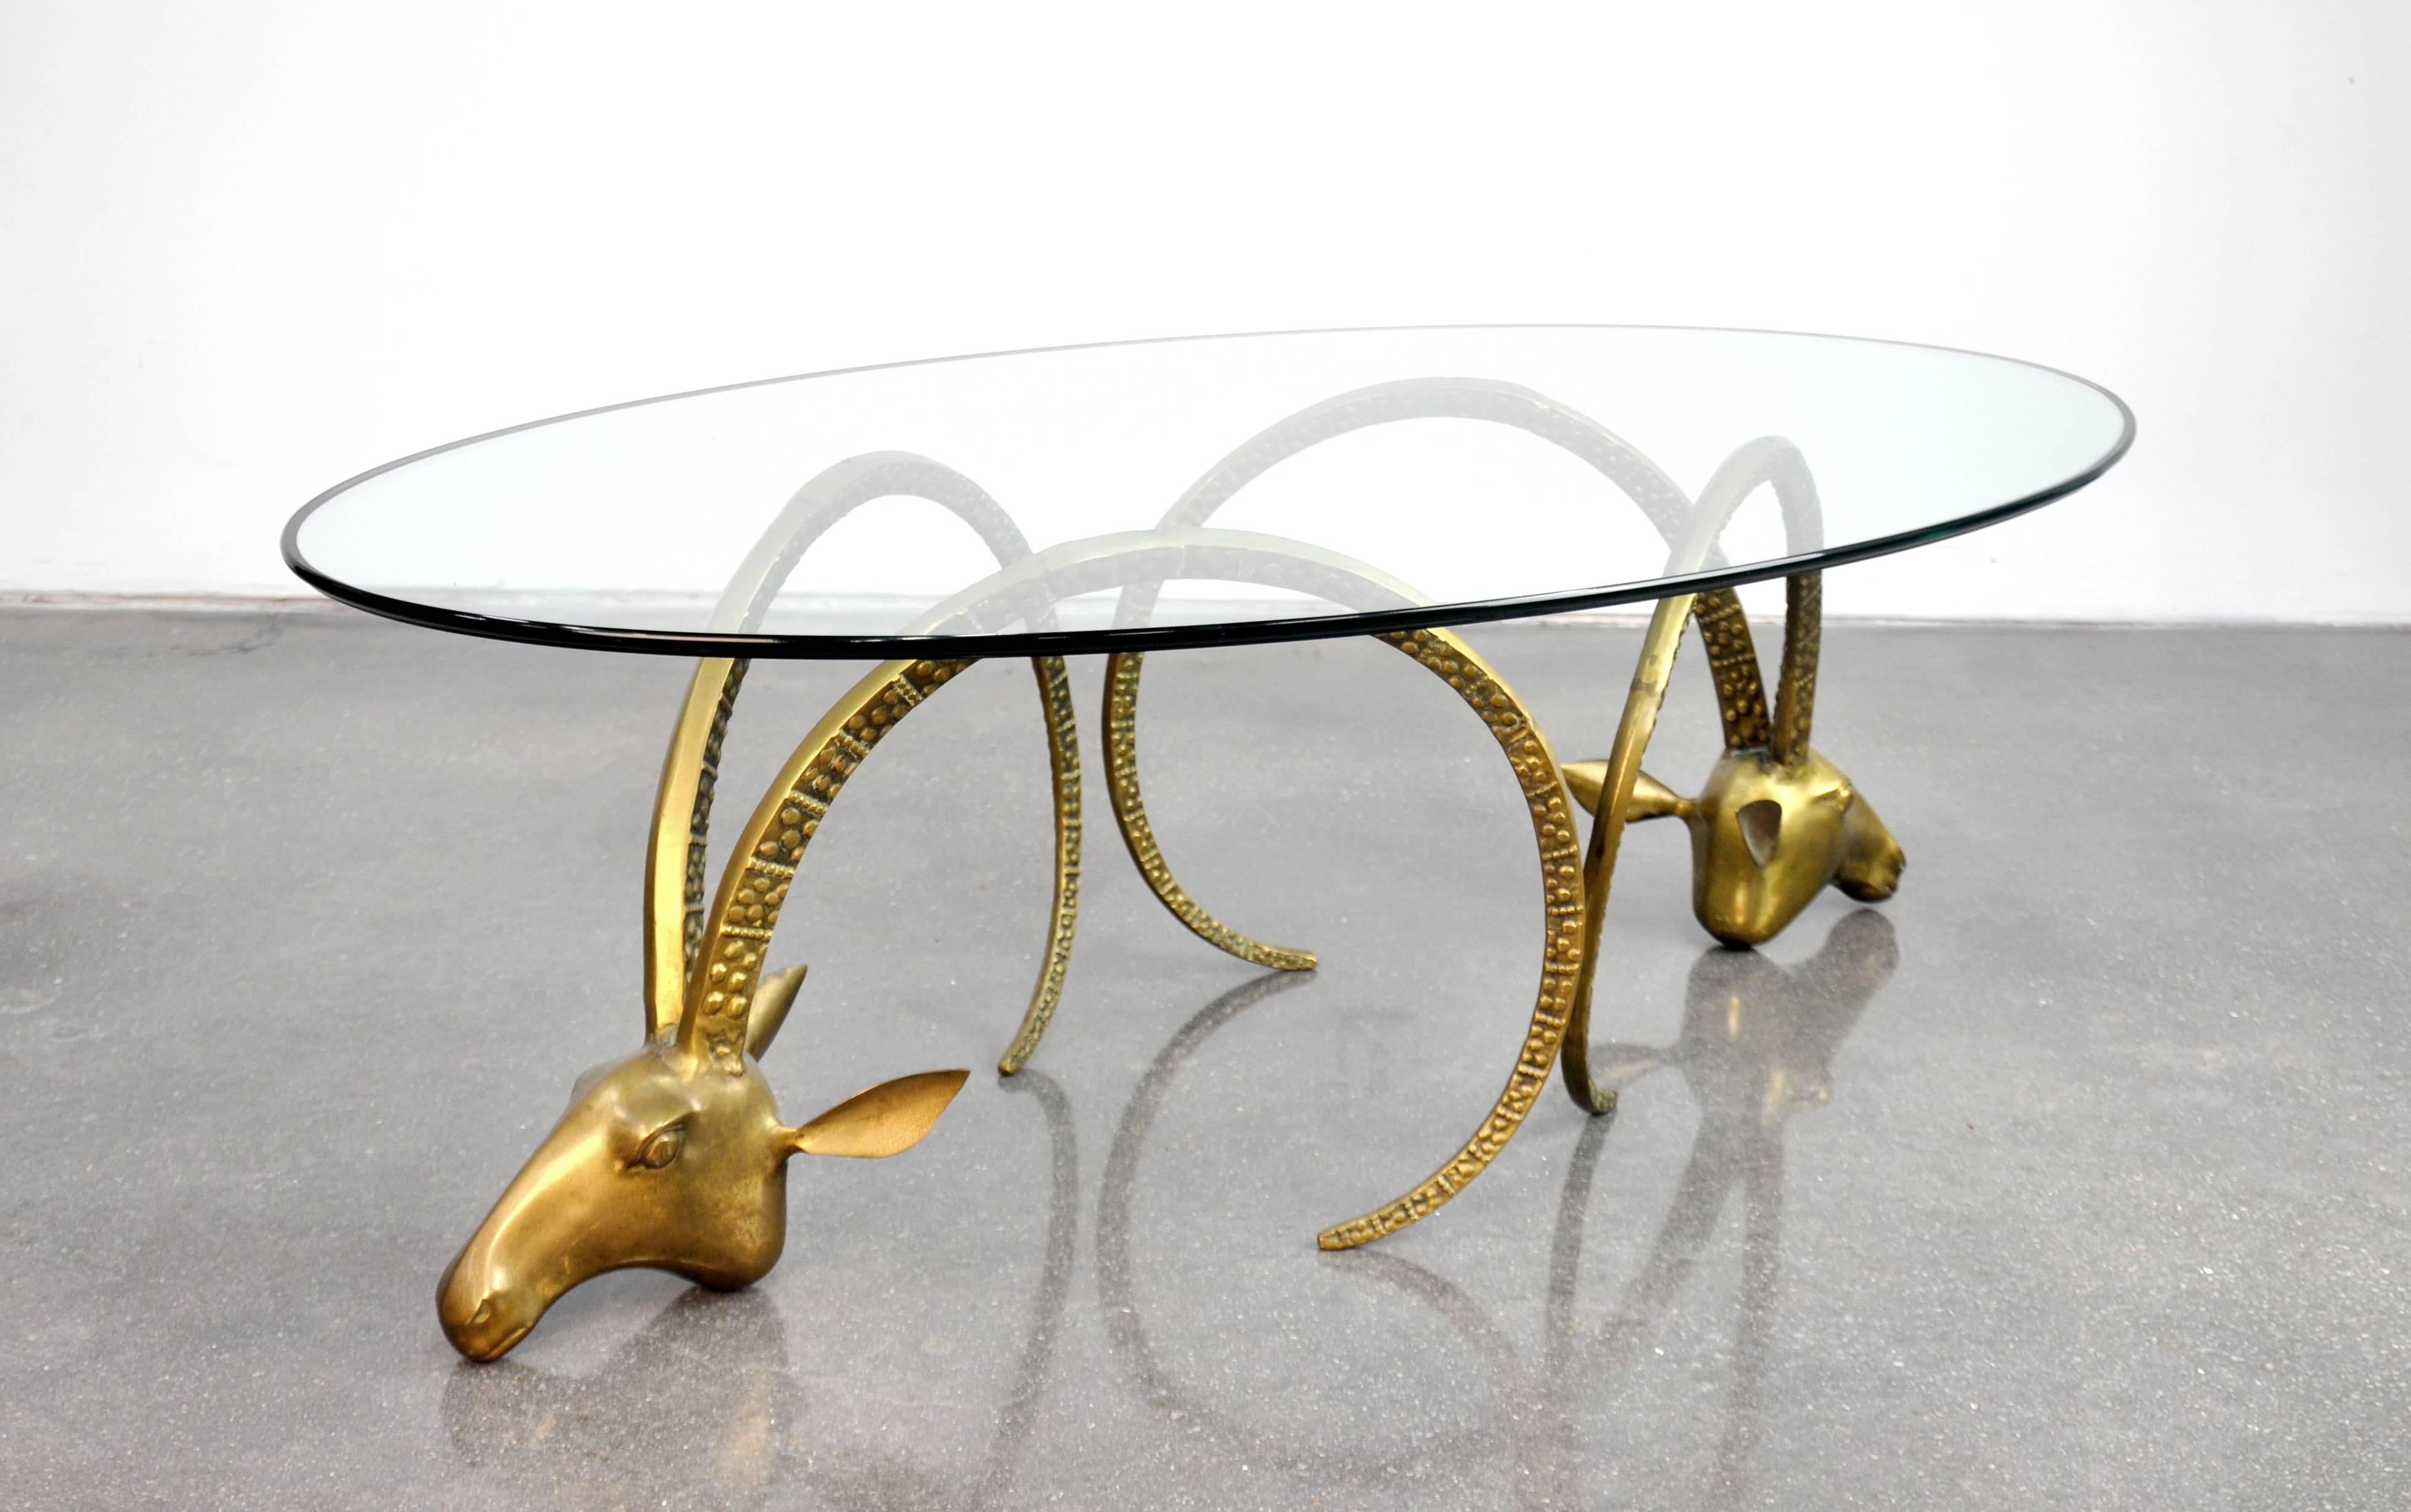 A striking Mid-Century Modern ram's head cocktail table in the style of Alain Chervet, dating from the 1970s. The Hollywood Regency table features an oval bevelled glass top resting on a pair of brass ibex heads. The bases can also be used